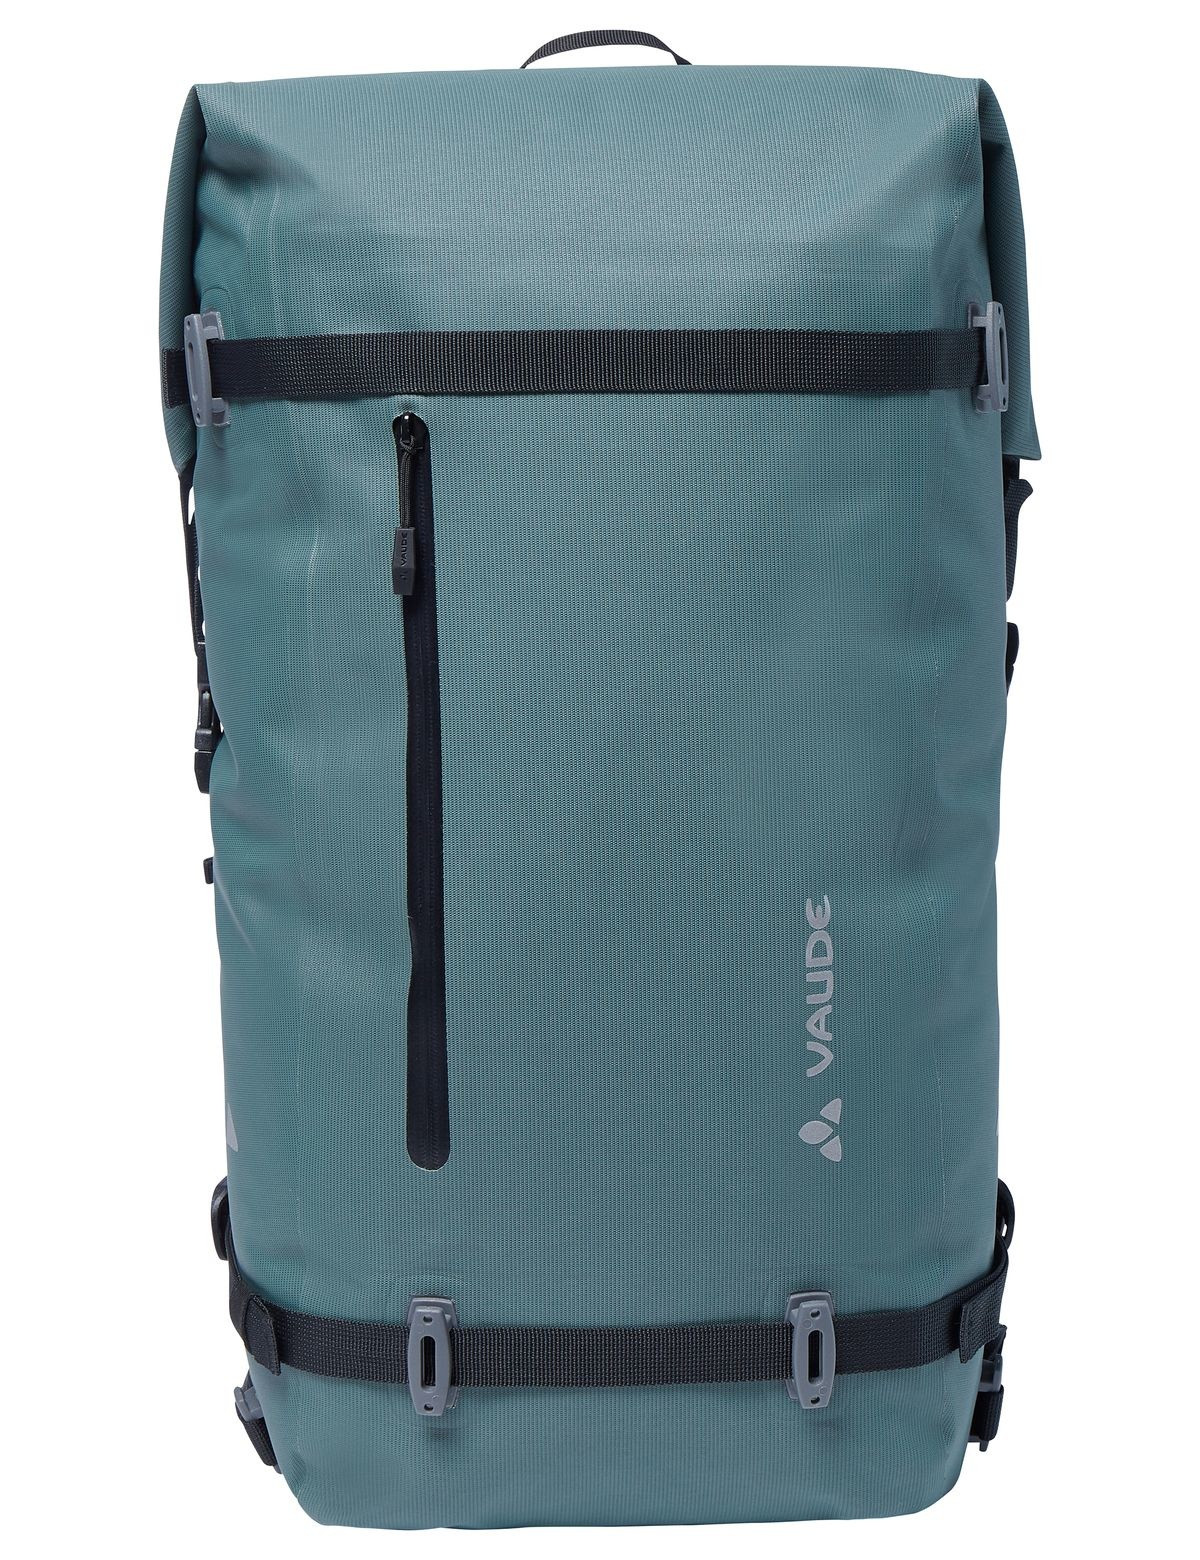 Rugzak Proof 22 Dusty Forest 22L